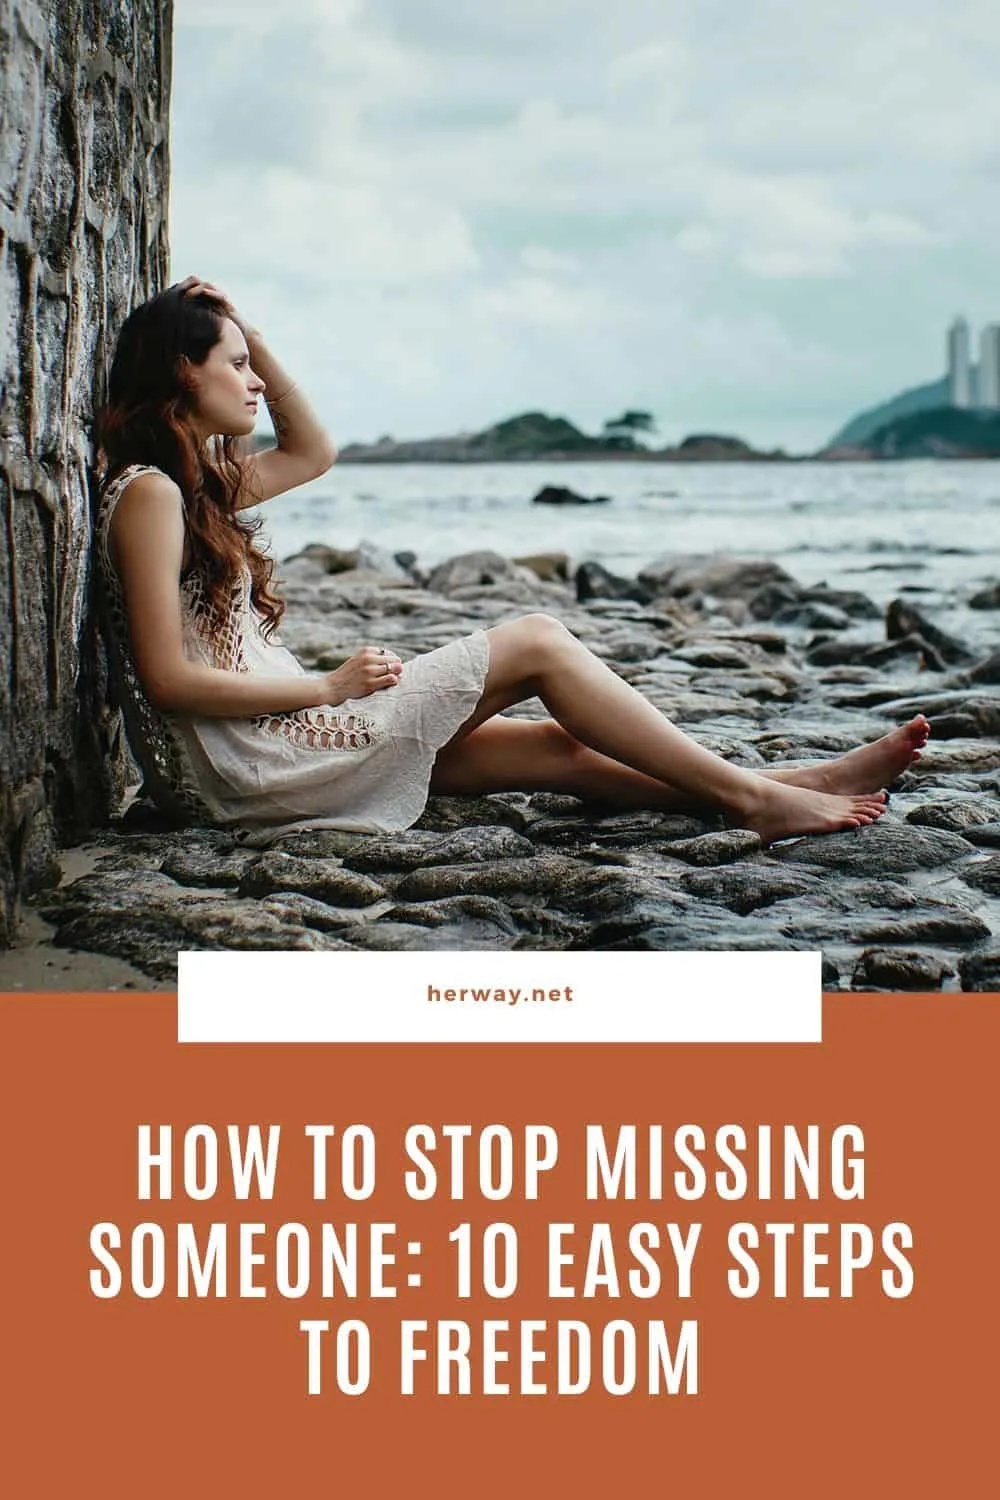 How To Stop Missing Someone: 10 Easy Steps To Freedom